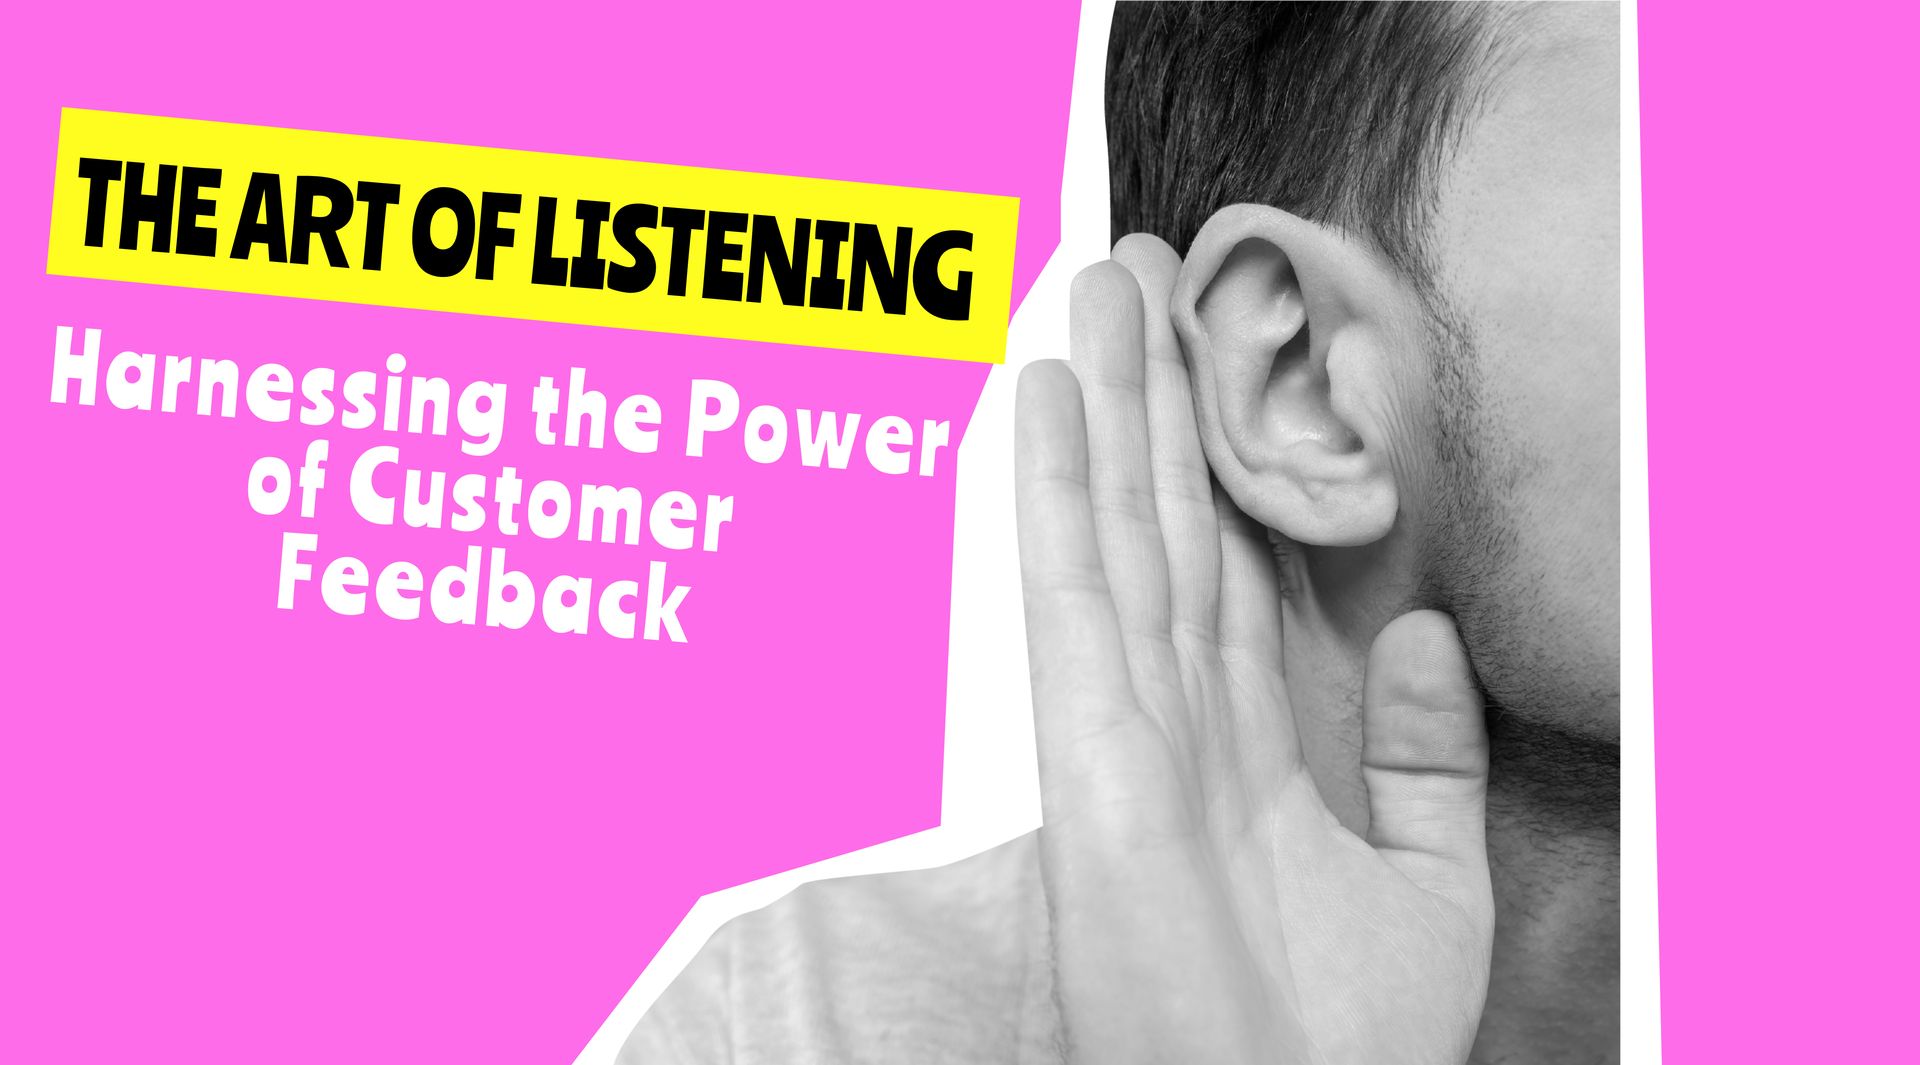 The Art of Listening: Harnessing the Power of Customer Feedback